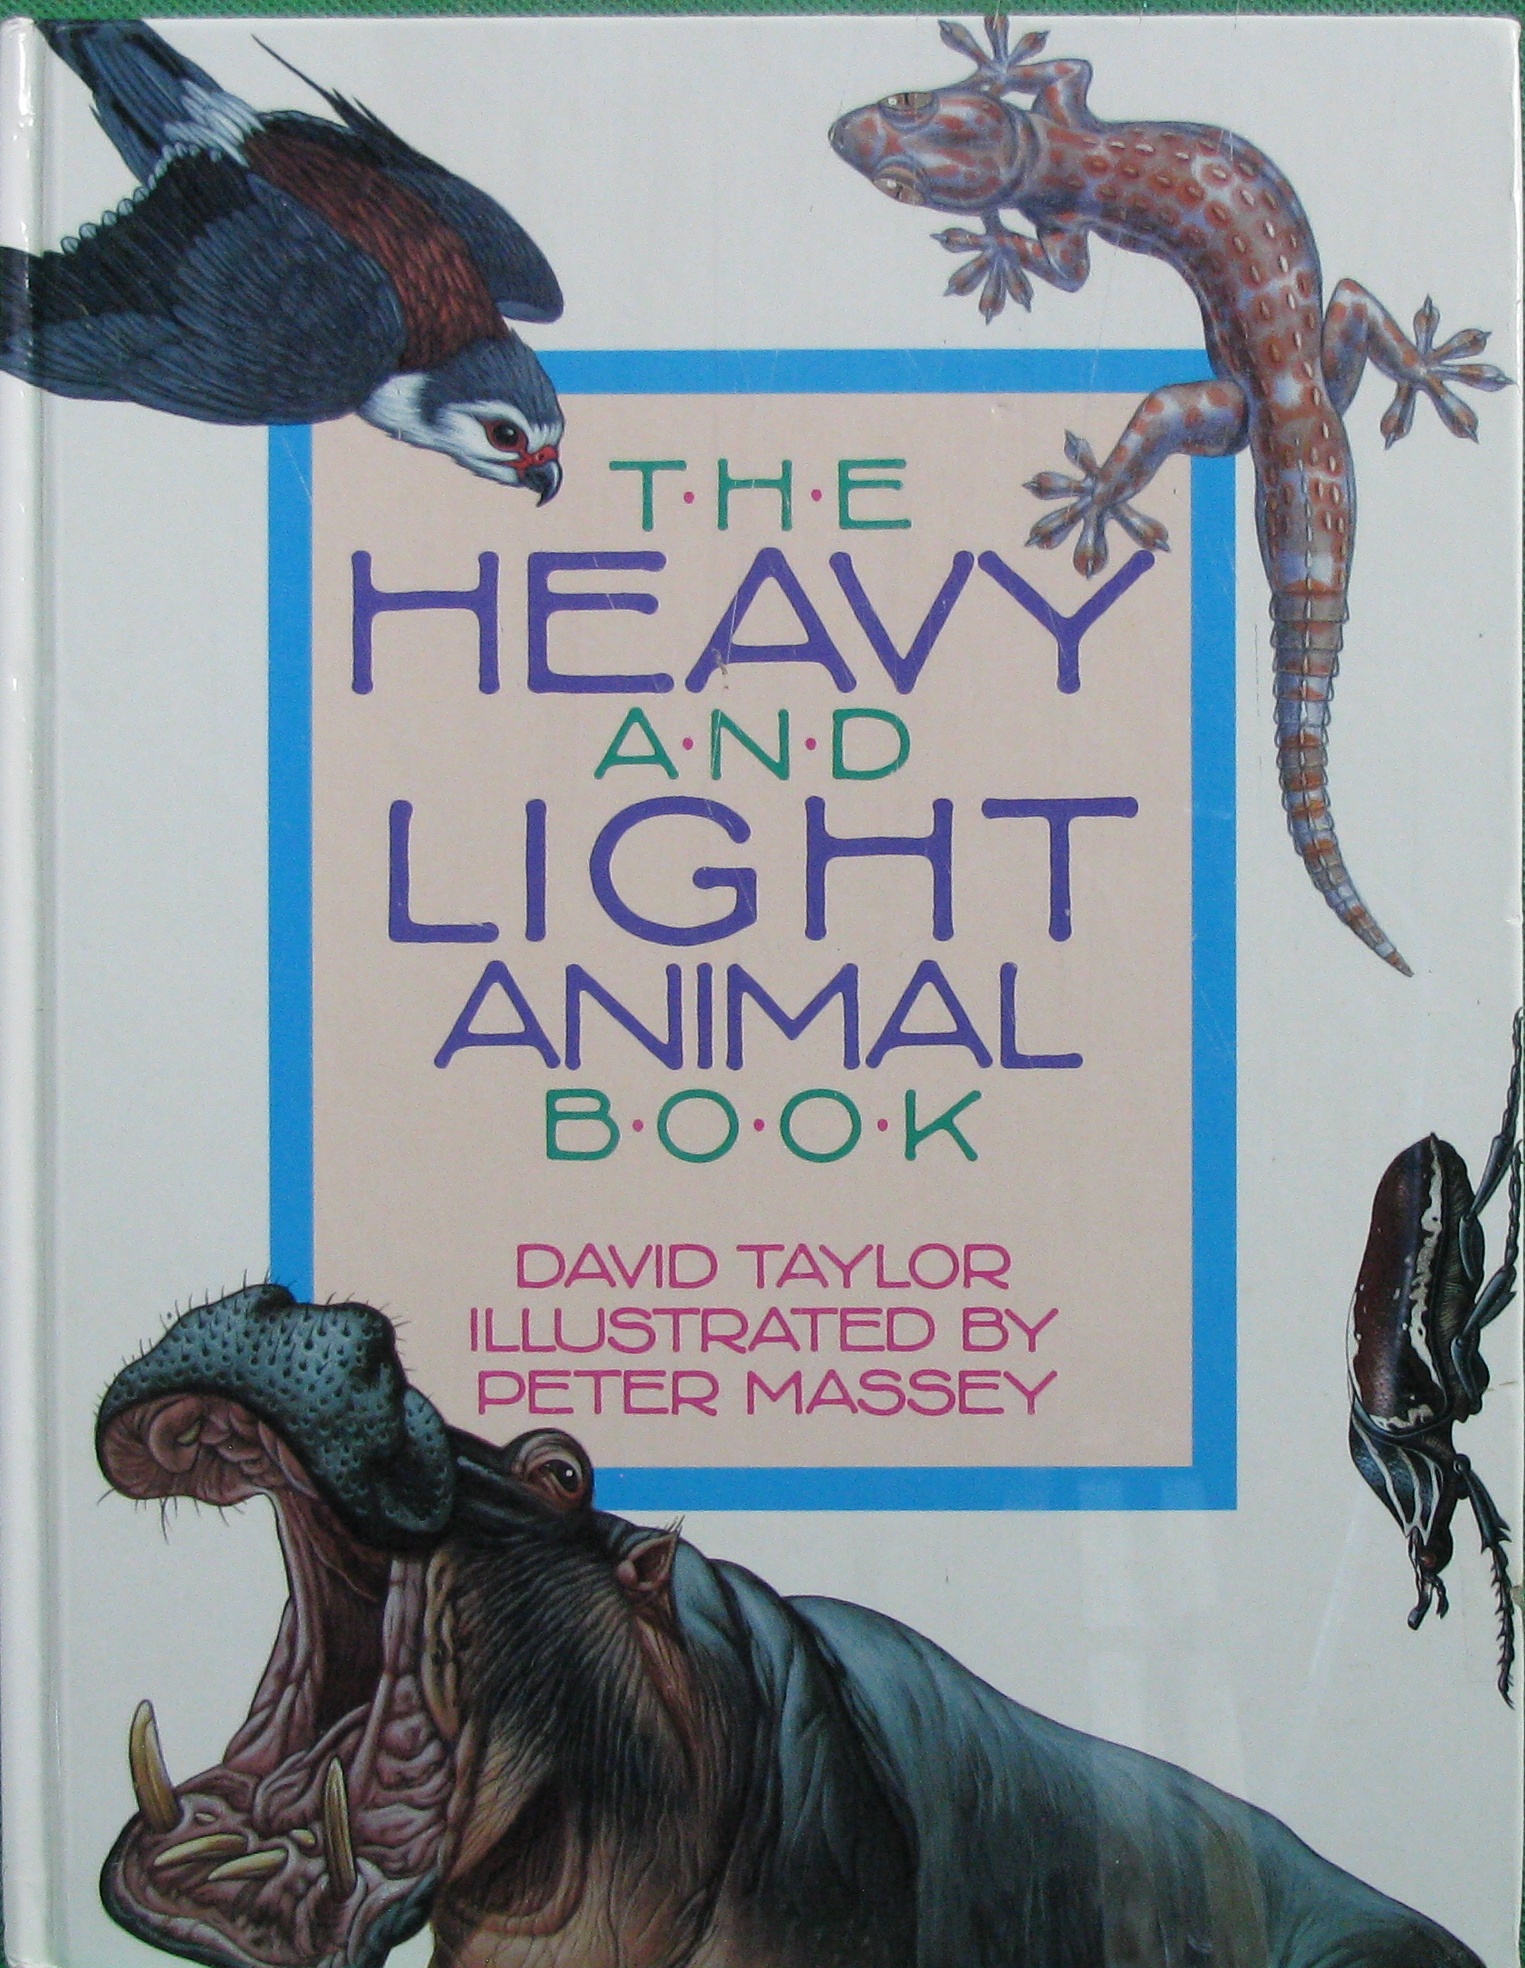 the heavy and light animal book